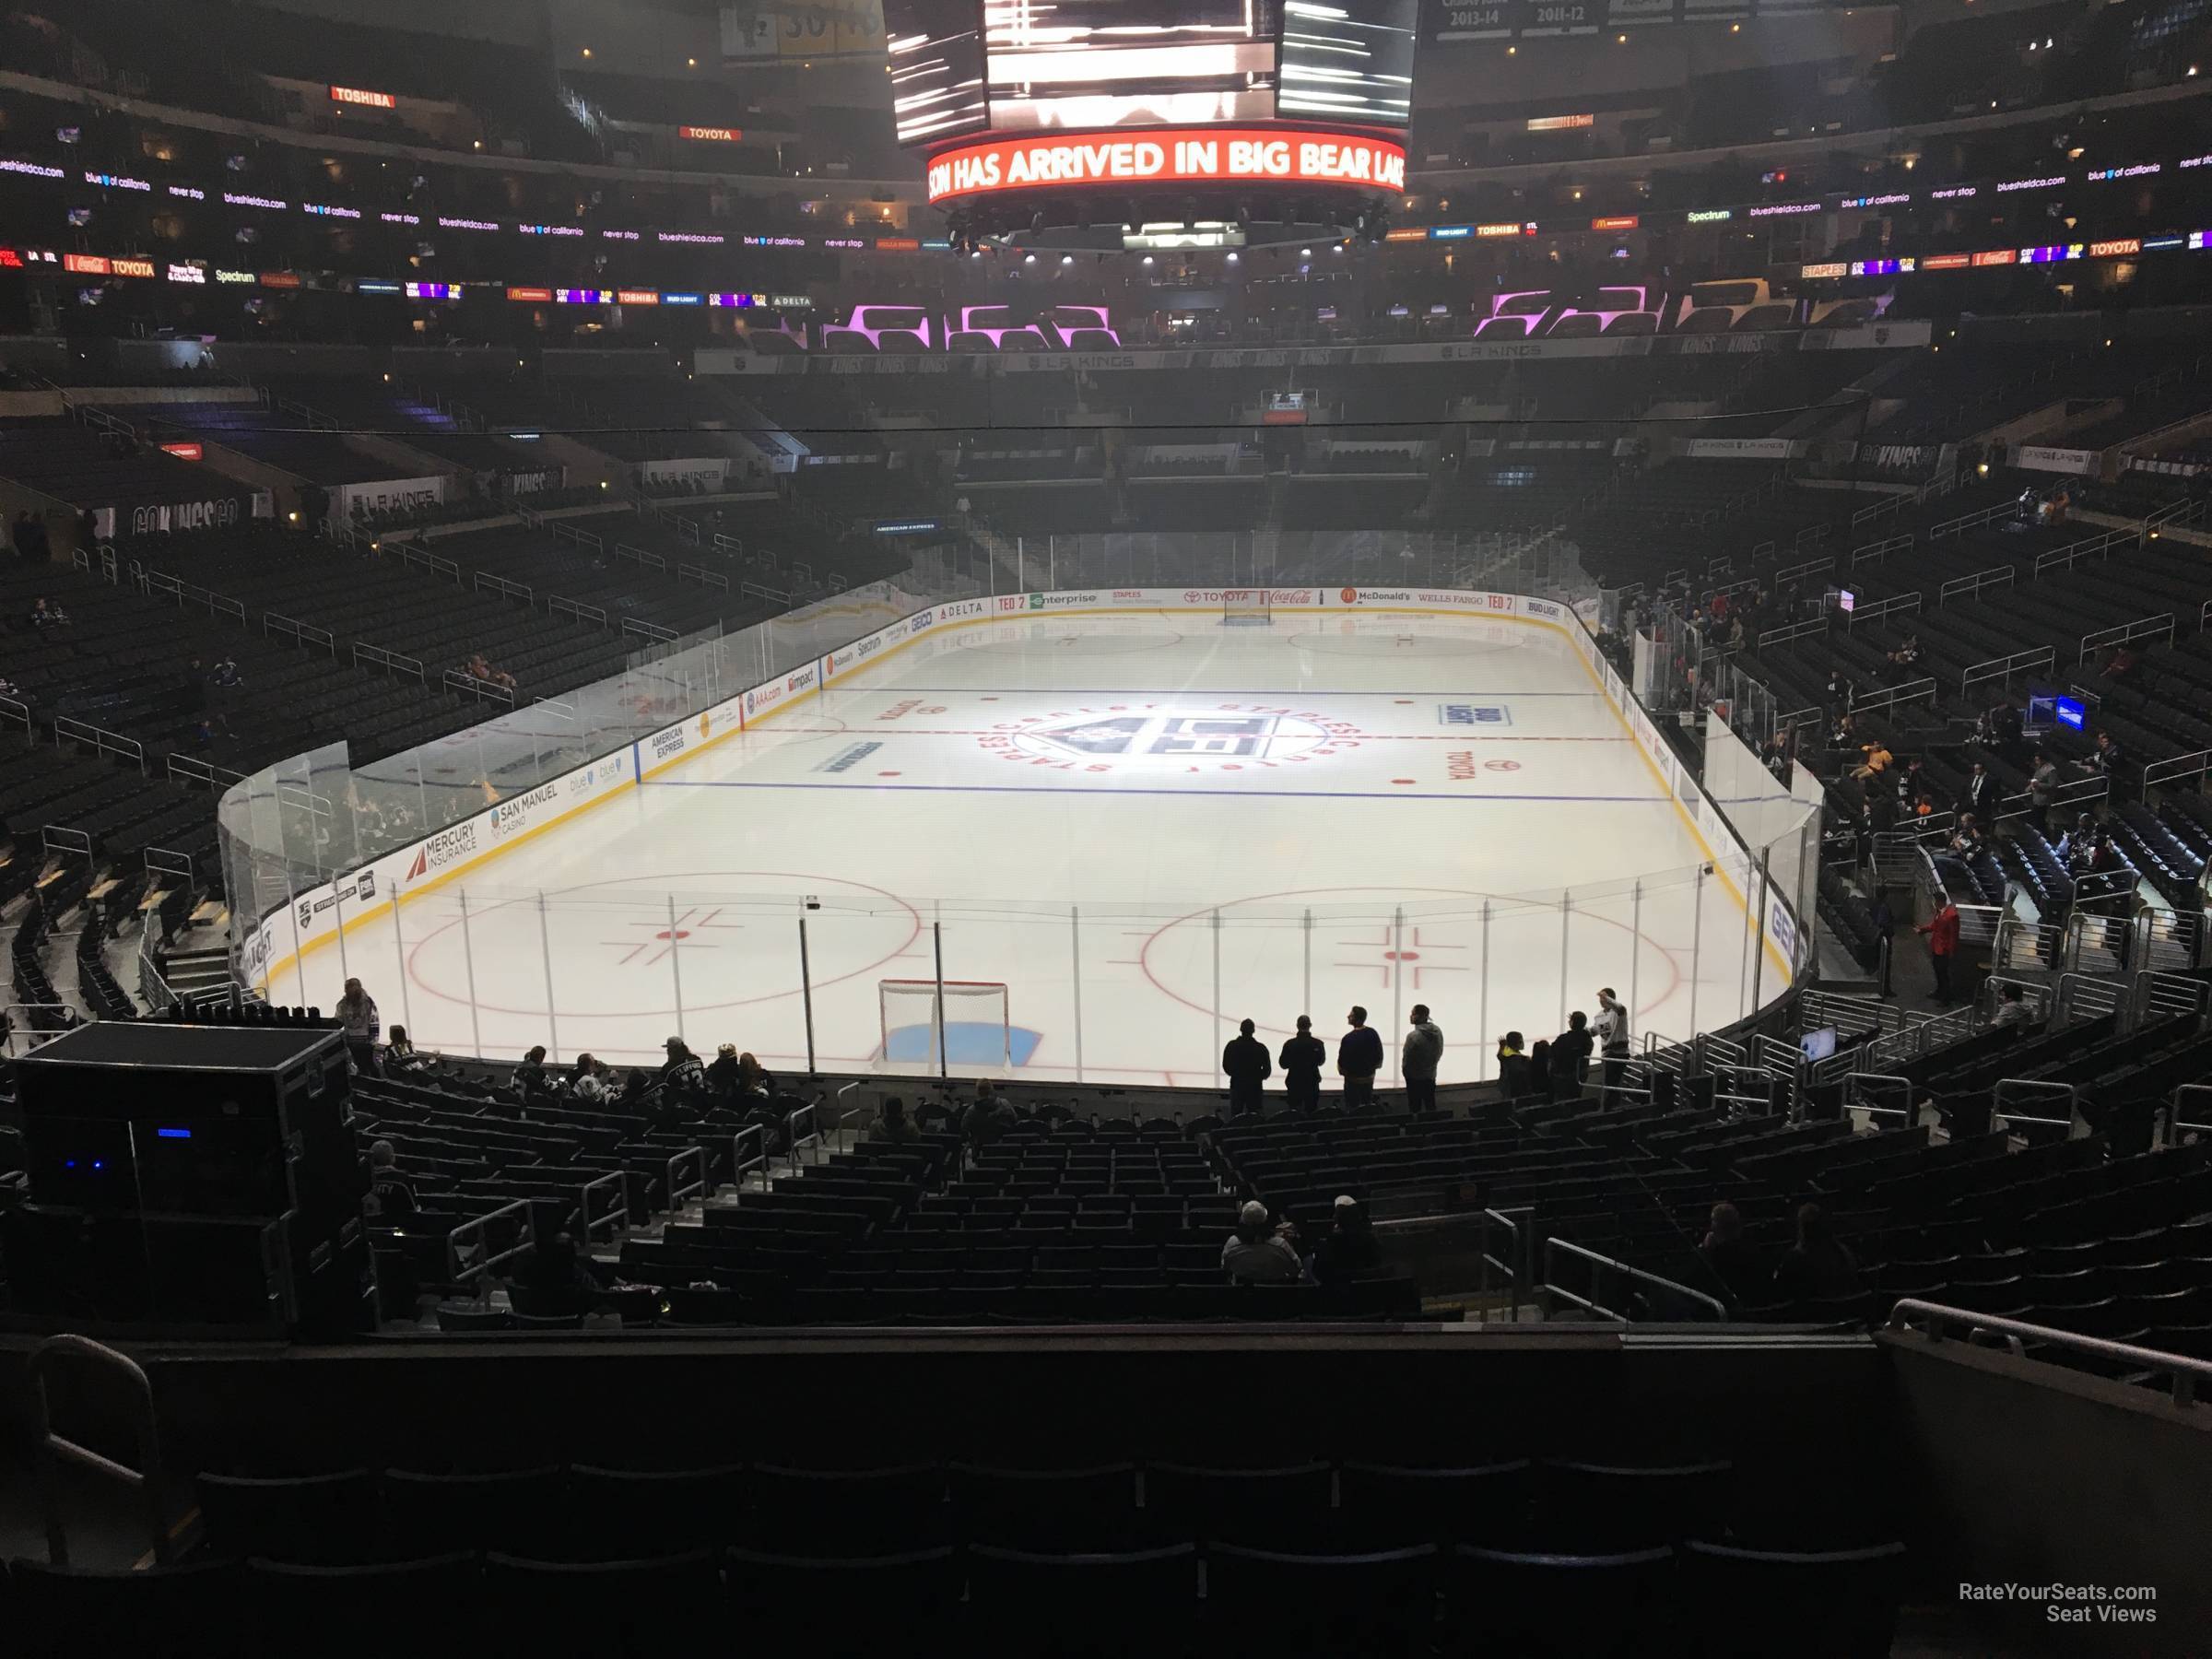 section 207, row 6 seat view  for hockey - crypto.com arena